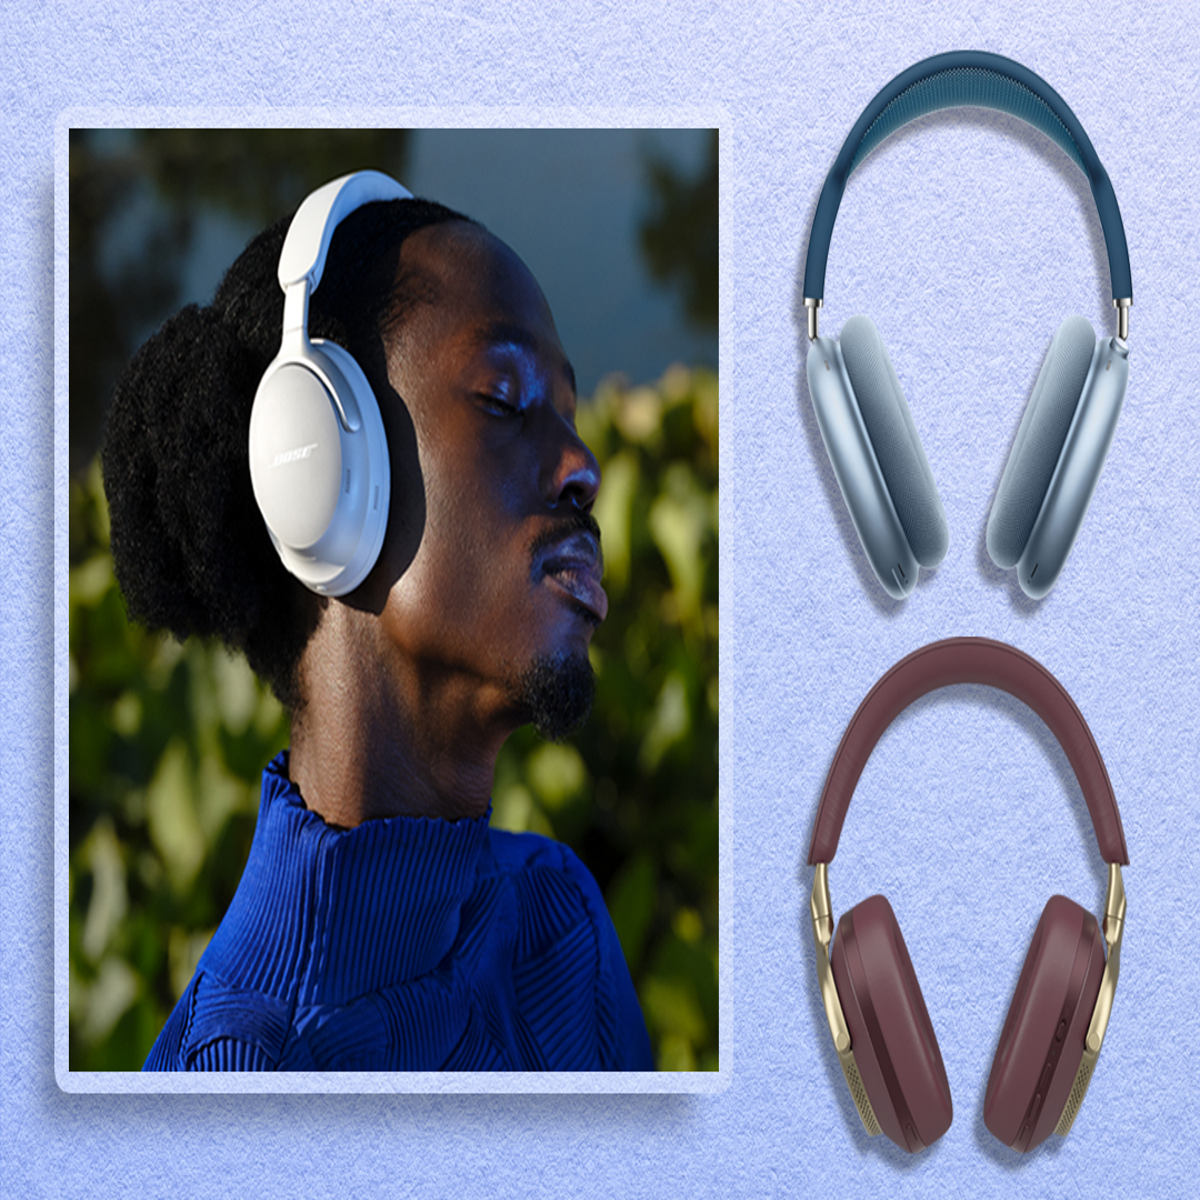 Over-Ear headphones: For Immersive Sound Experience